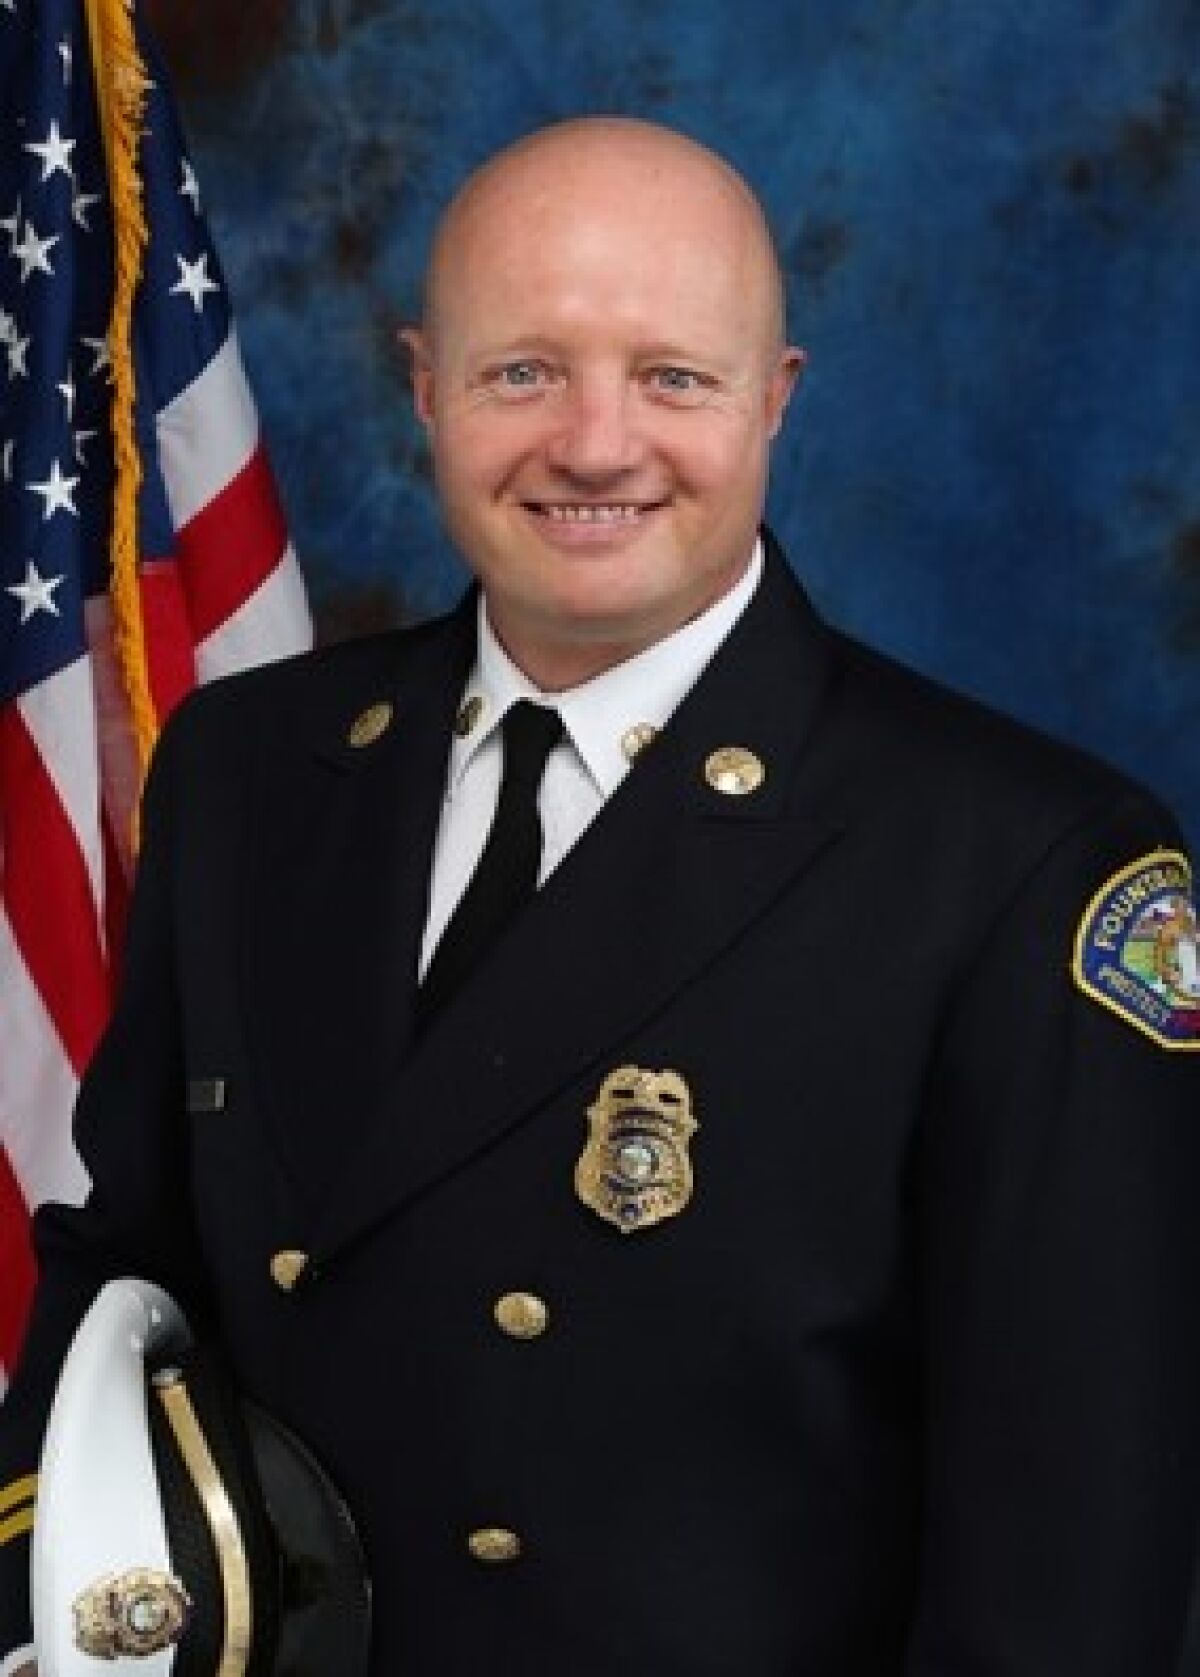 Bill McQuaid is the new fire chief of Fountain Valley. He joined the city's fire department in 1996.